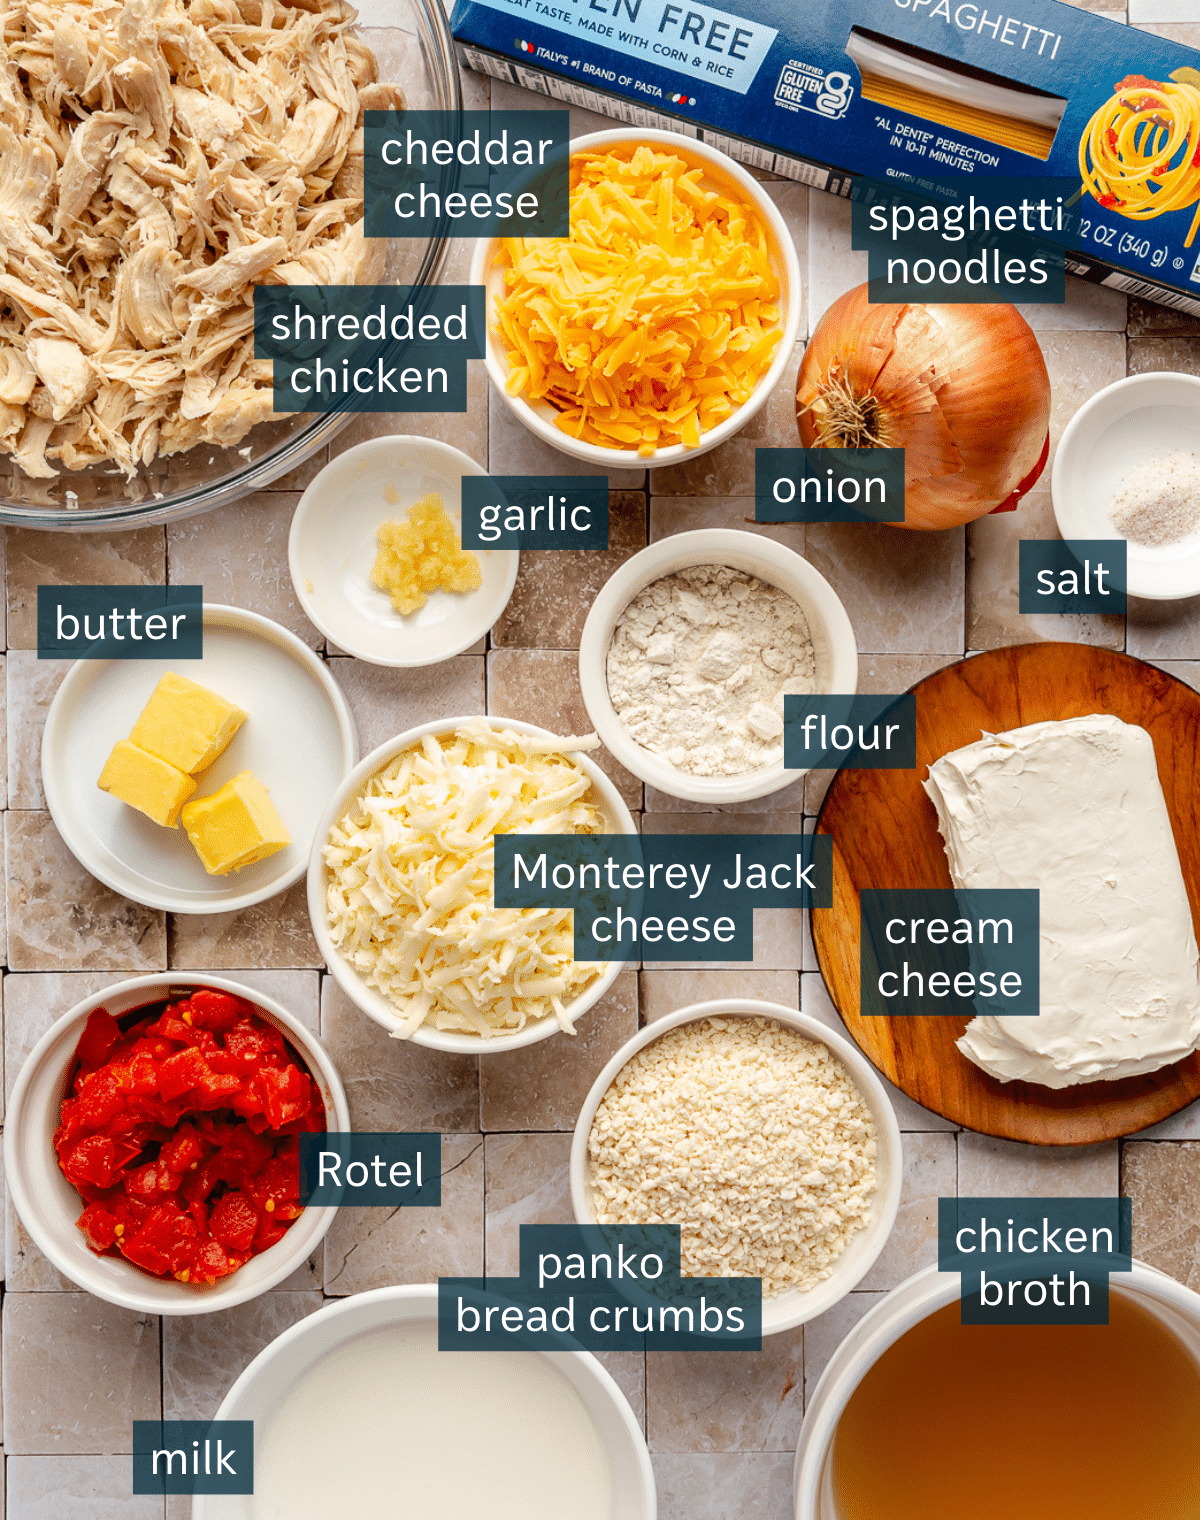 Ingredients for baked chicken spaghetti sit in a variety of bowls on a cream colored tile countertop.